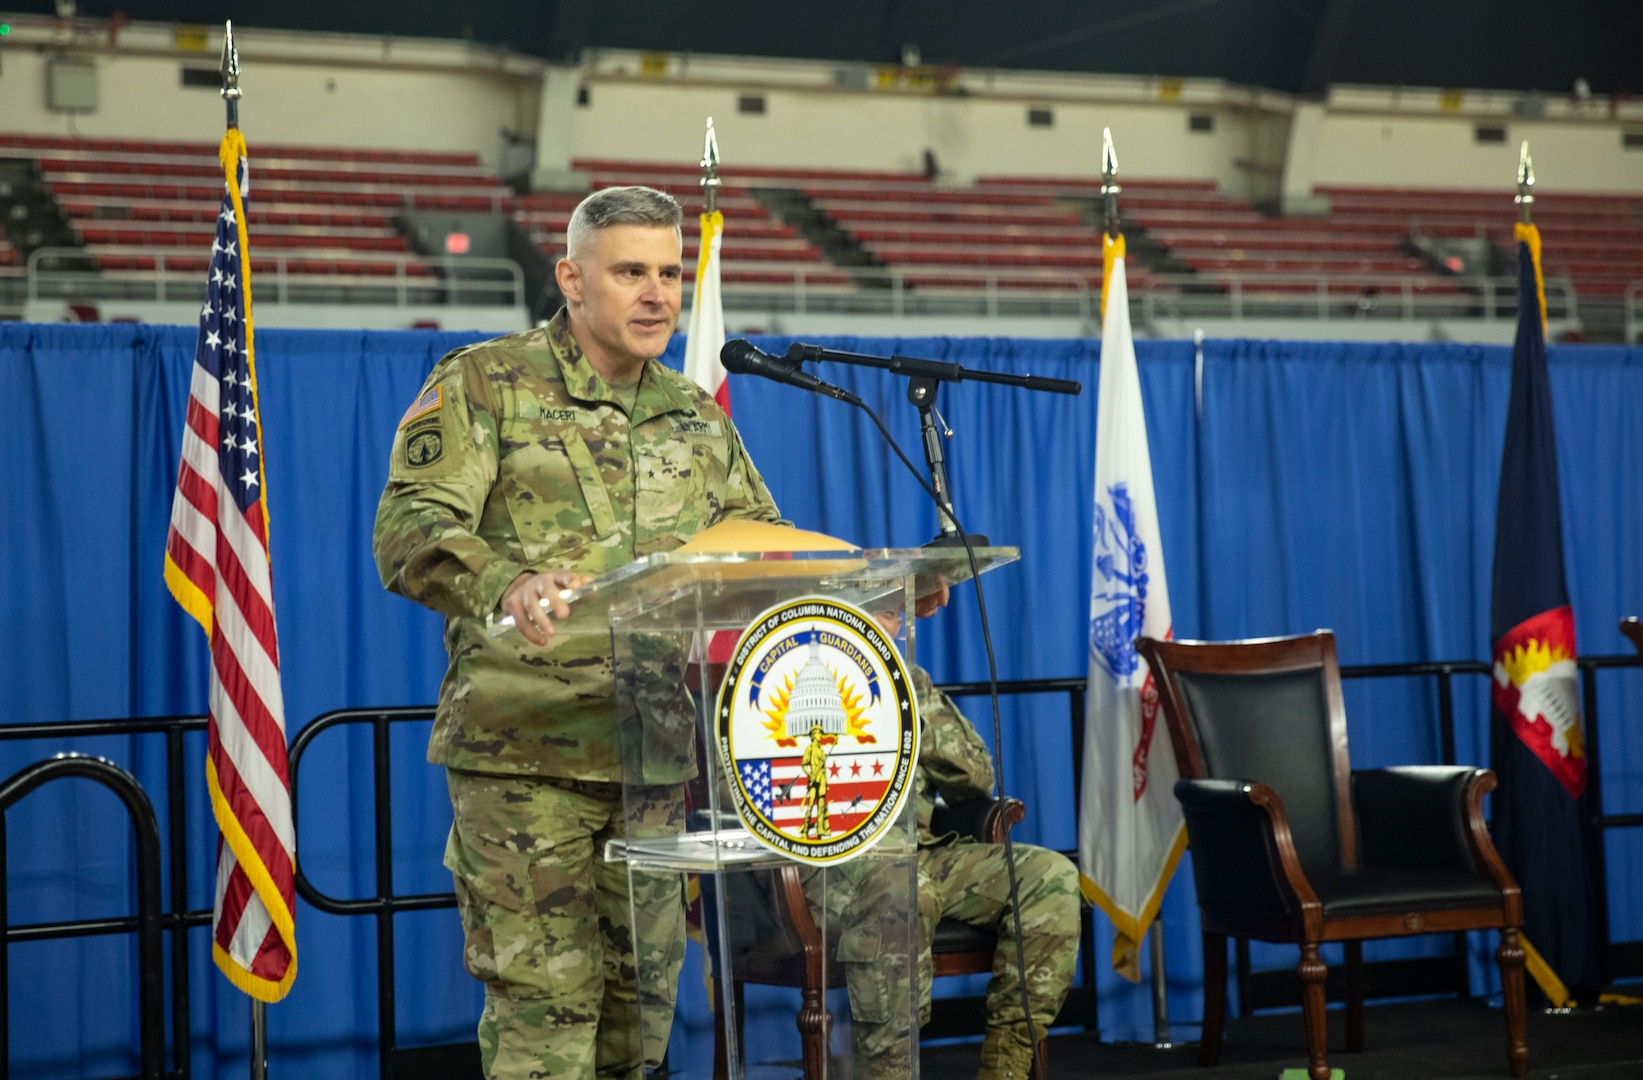 U.S. Army Brig. Gen. Leland L. Blanchard II relinquished command of the District of Columbia Army National Guard’s Land Component Command to Brig. Gen. Craig M. Maceri during a change of command ceremony April 13 at the D.C. Armory. The ceremony, steeped in military tradition and protocol, featured the traditional passing of the unit colors symbolizing the transfer of authority from one commander to another.